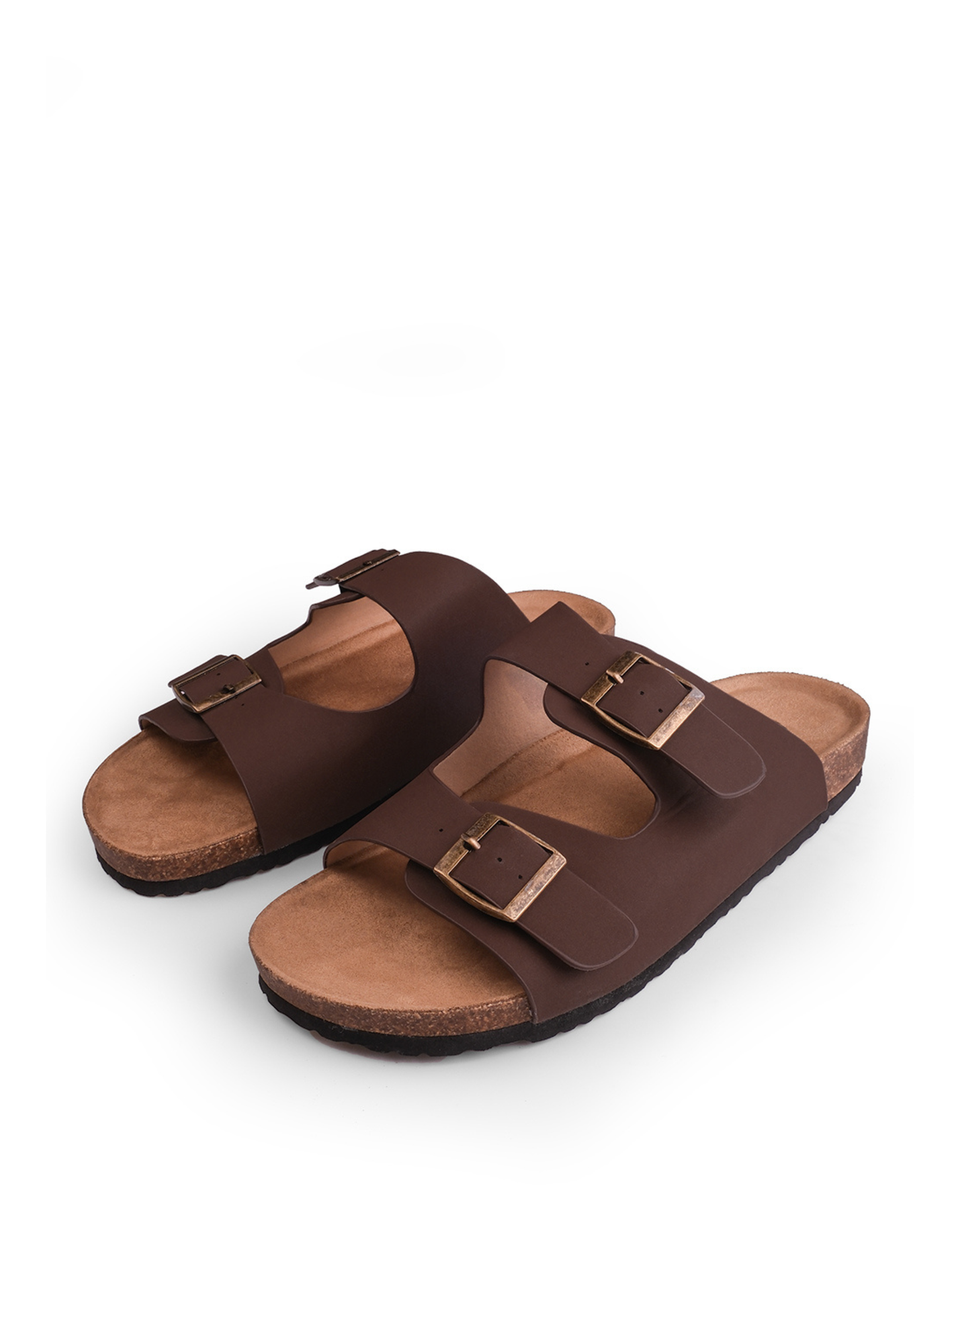 Where's That From Brown Nubuck Willow Flat Sandals